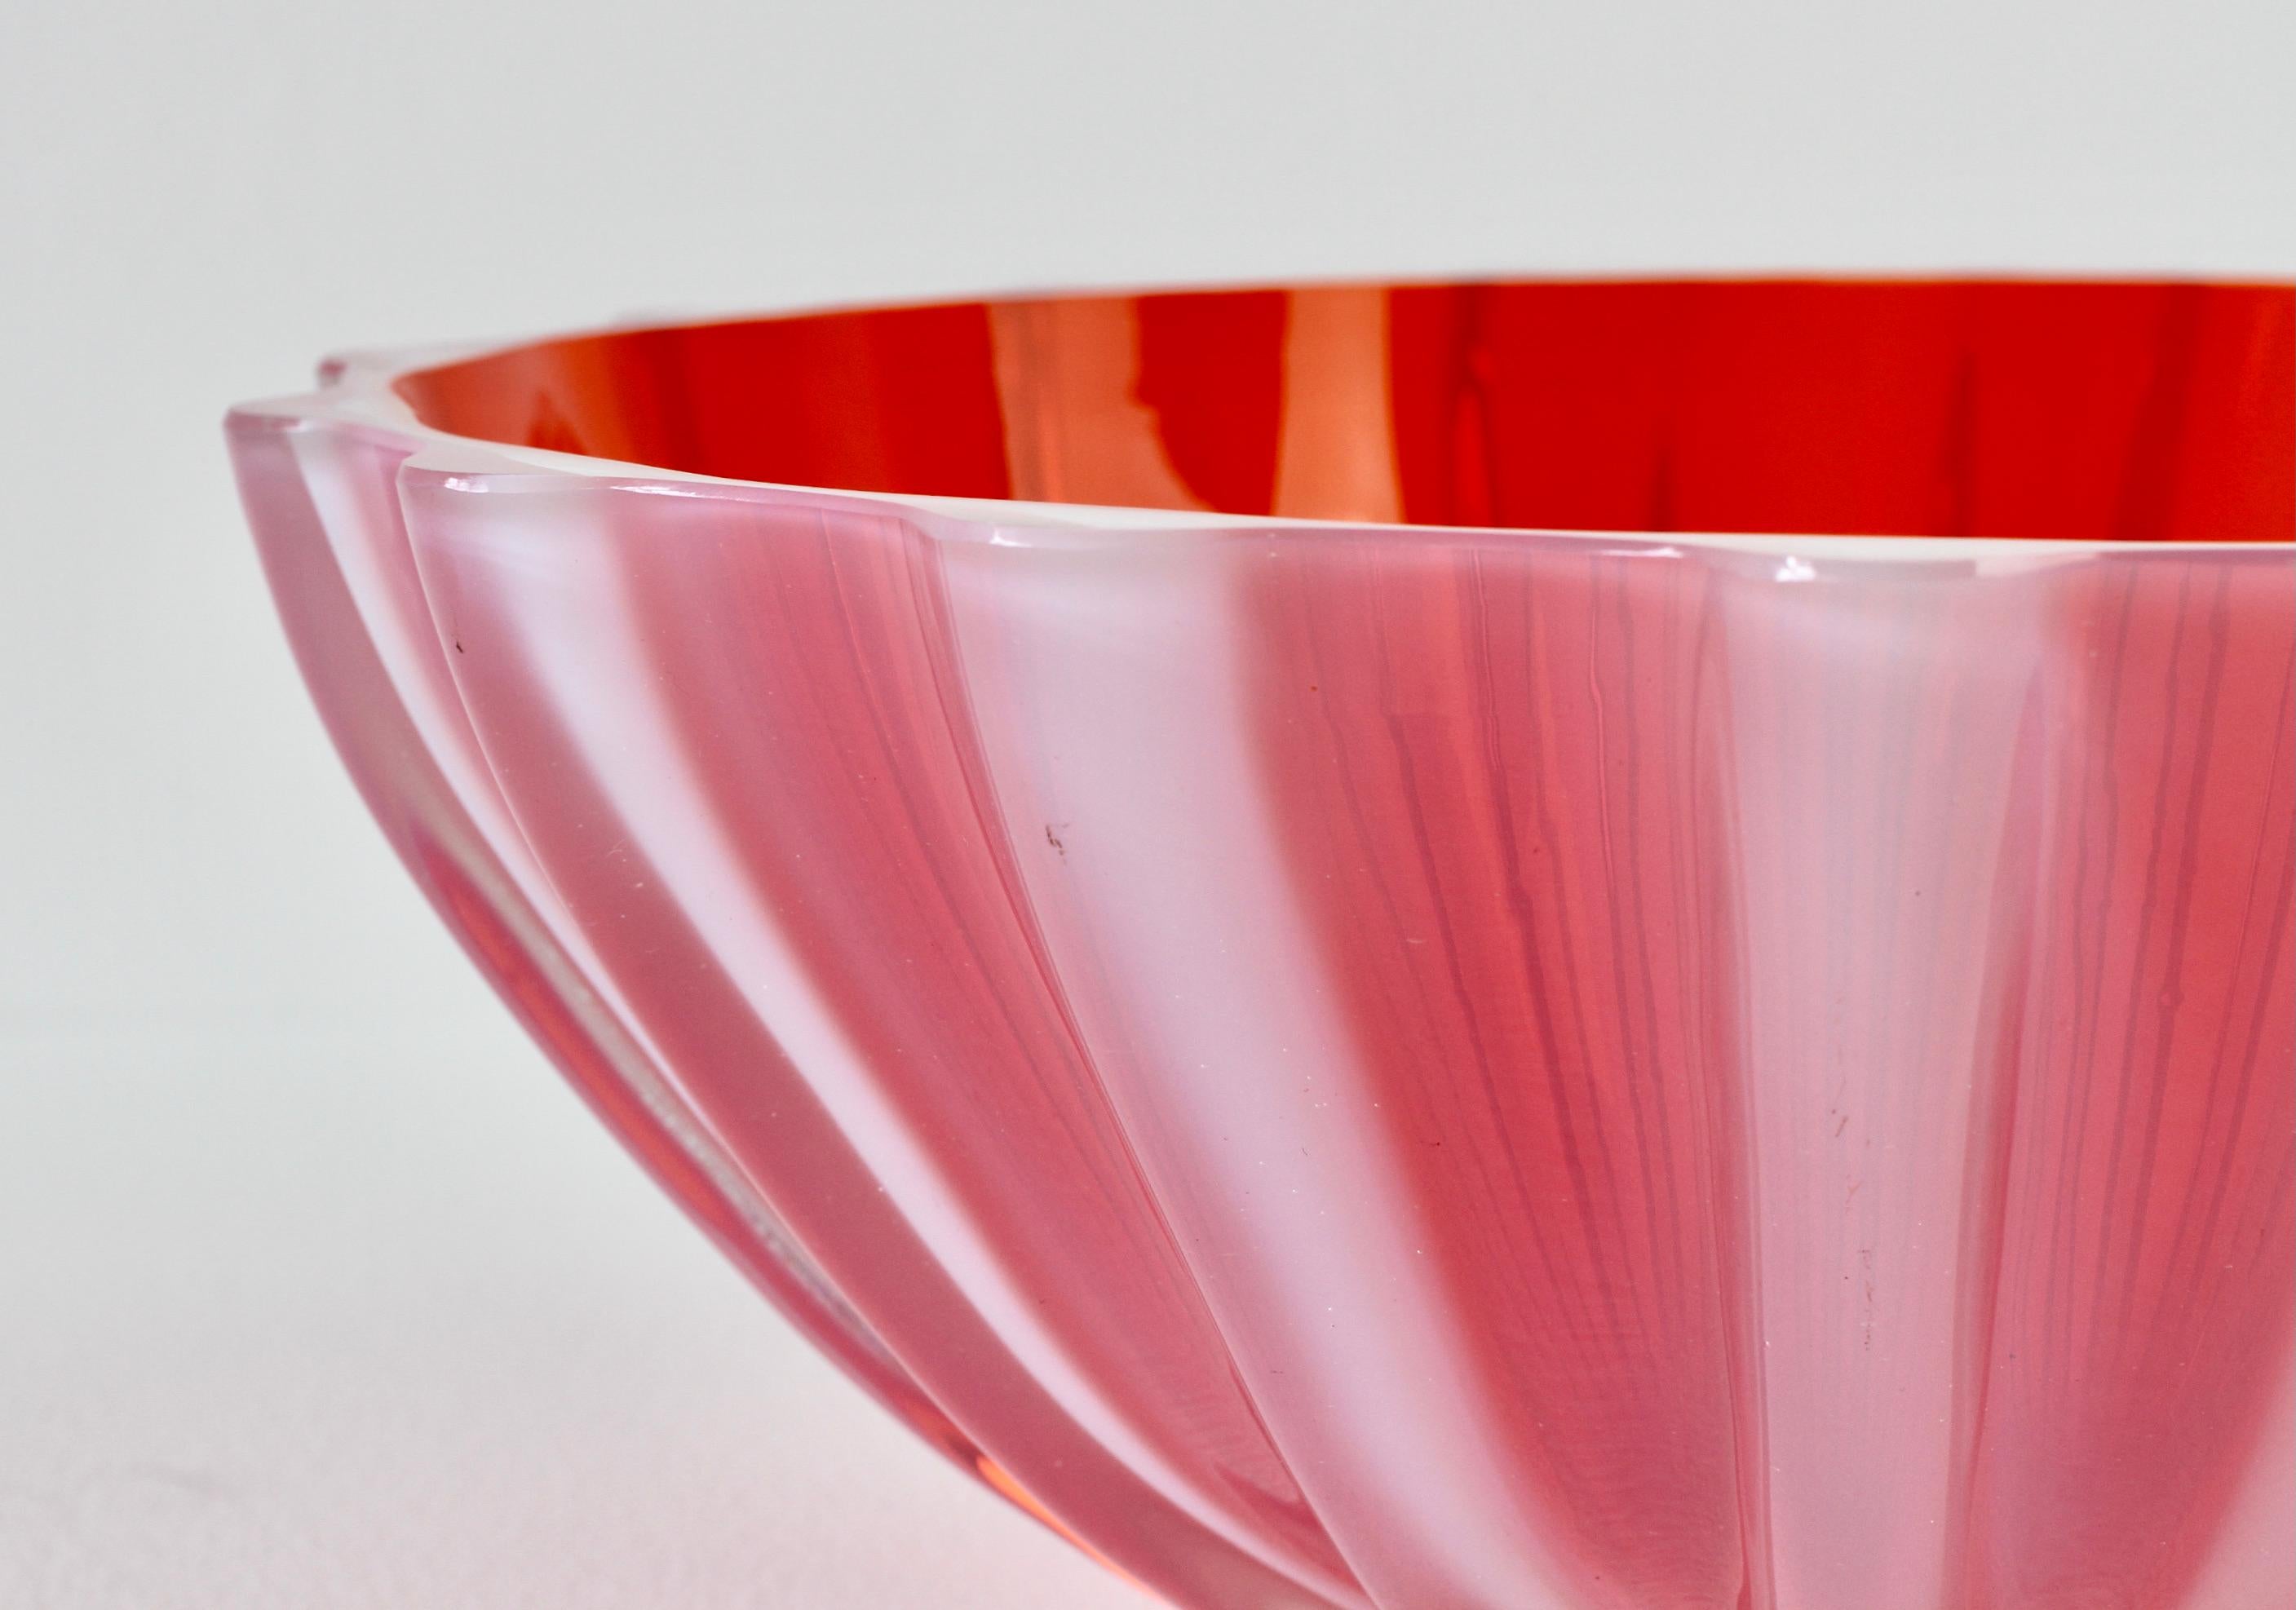 Late 20th Century Seguso Vetri d'Arte Large Red, Pink Opaline Murano Glass Fruit Bowl circa 1980s For Sale